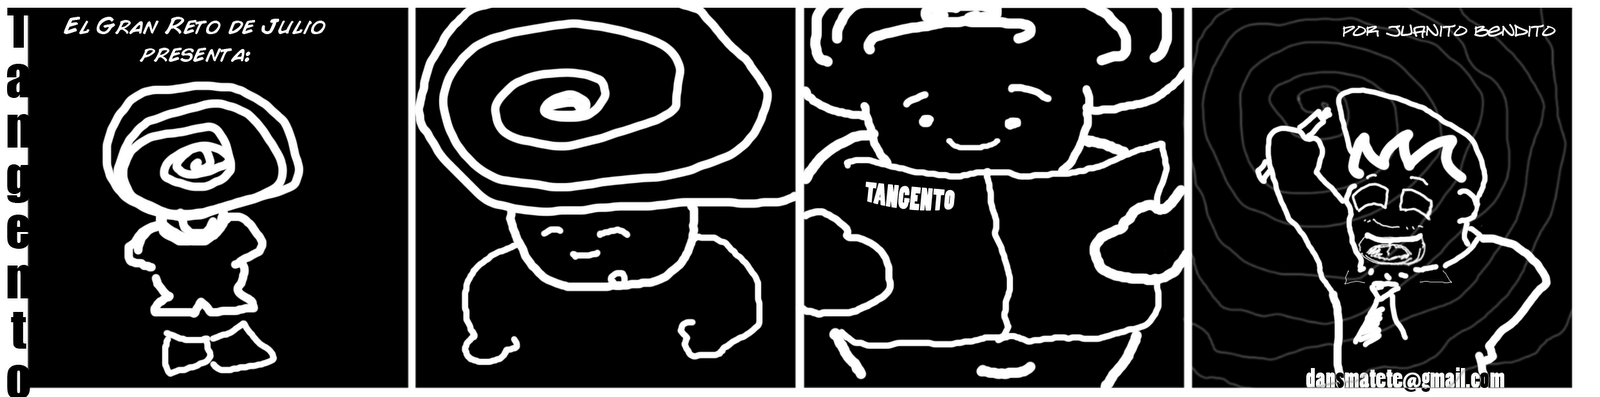 [01+Tangento+Intro+.png]